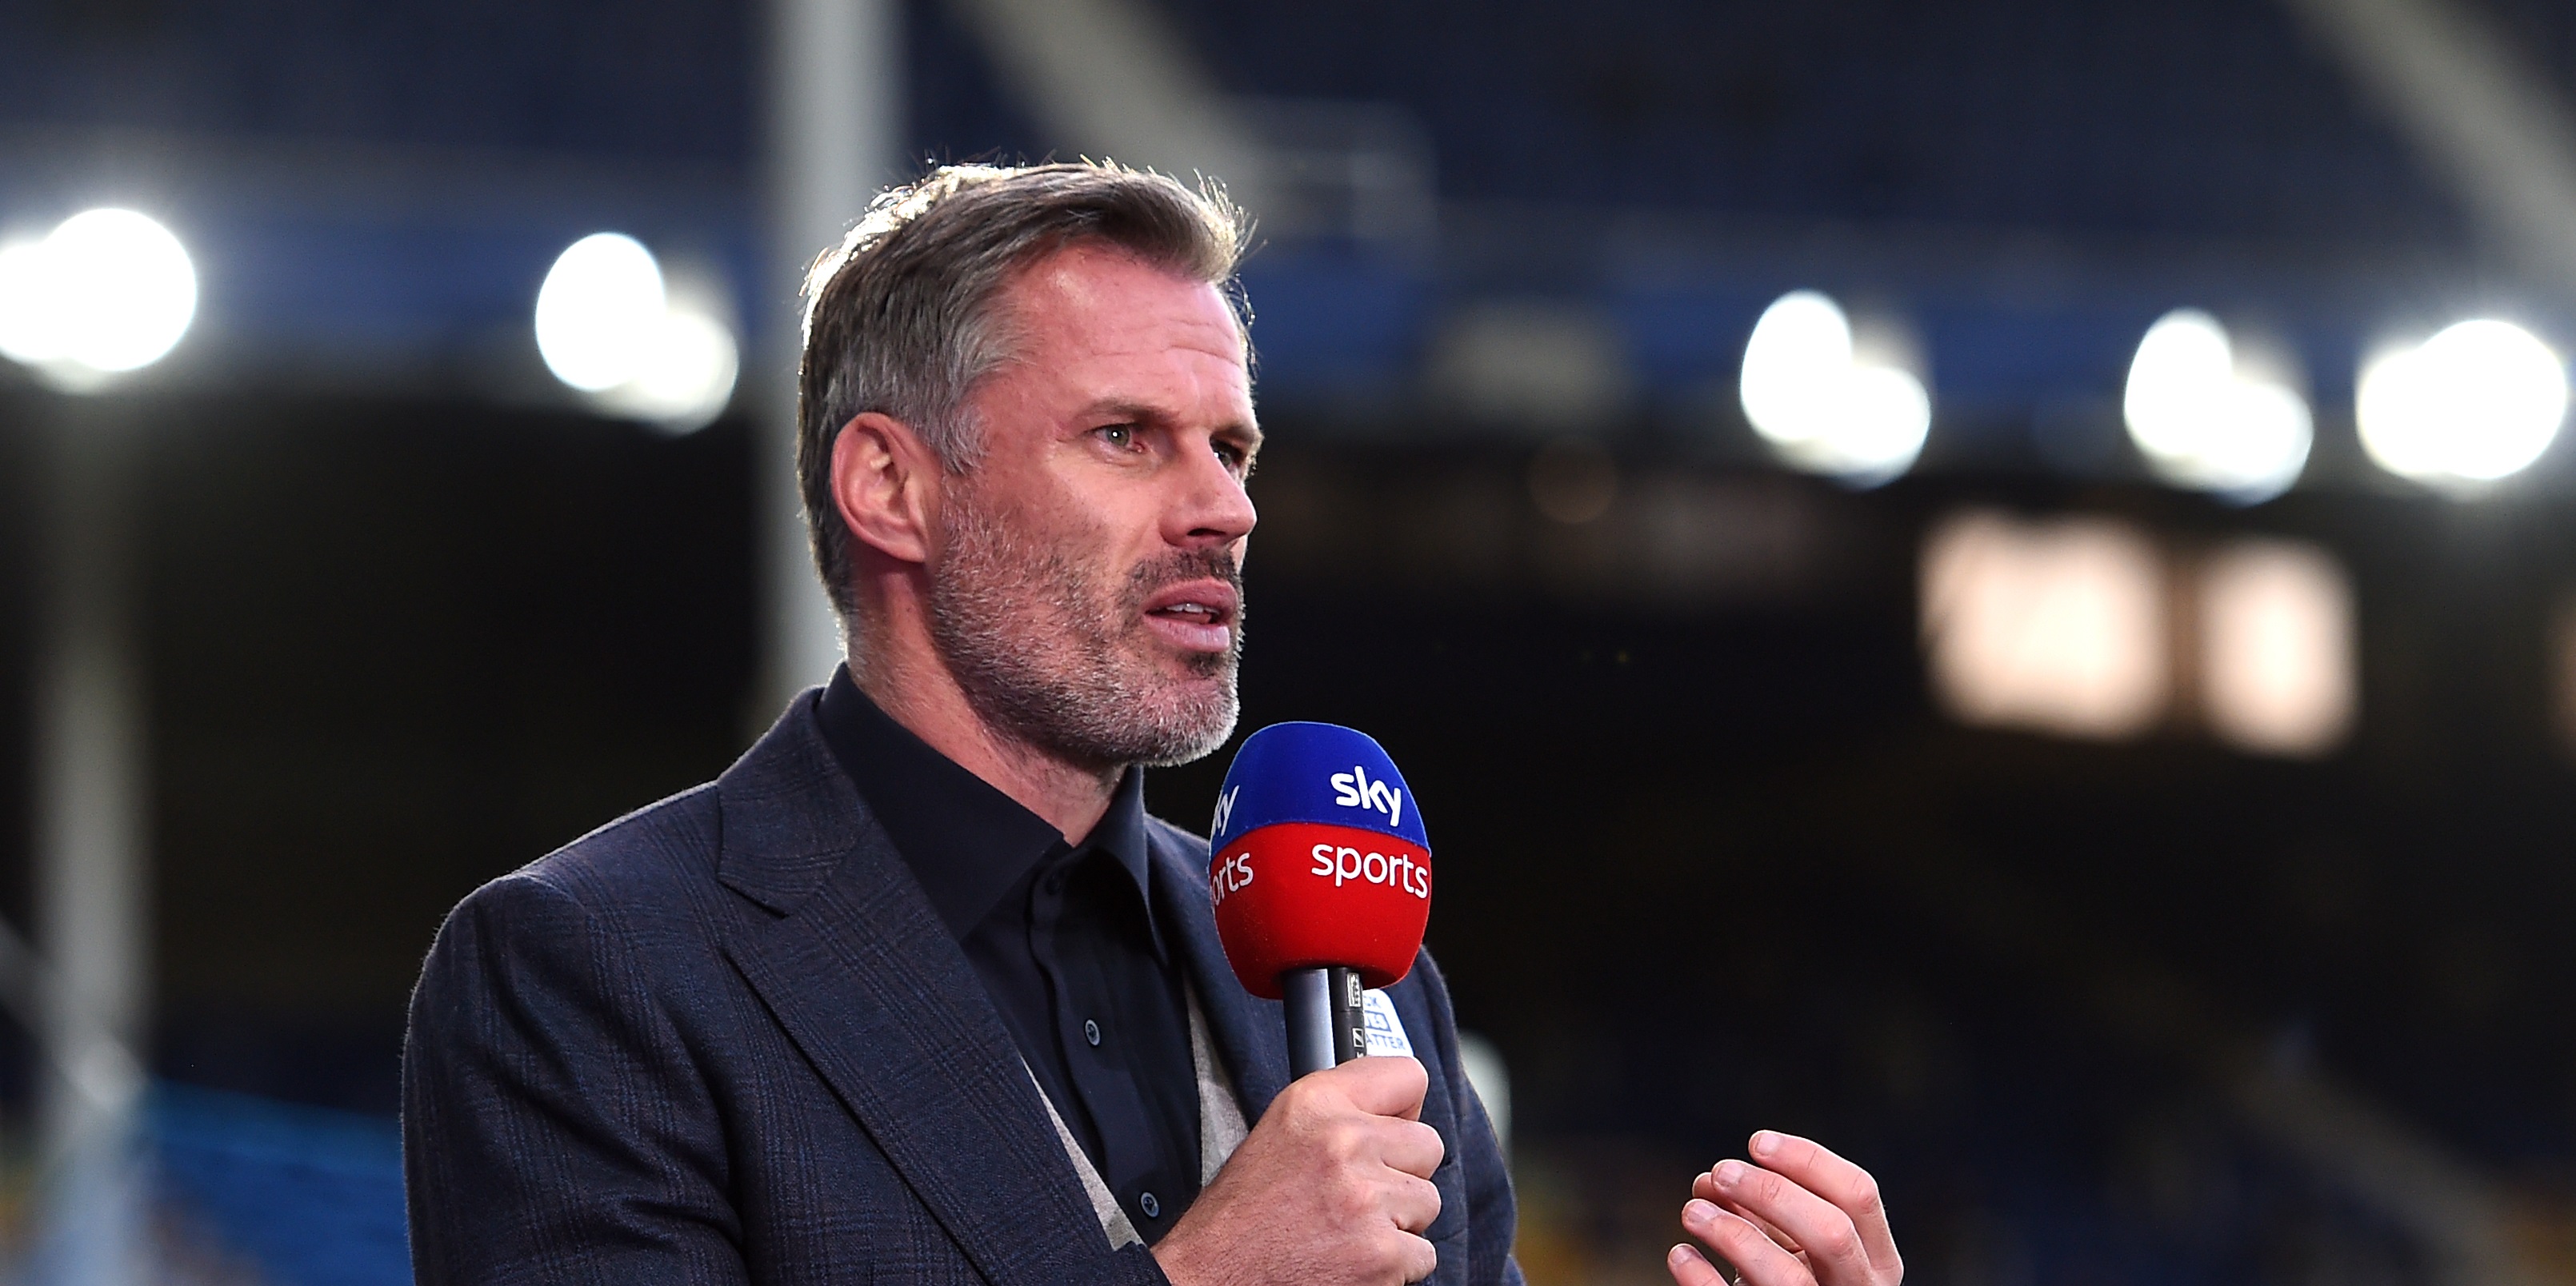 ‘It feels like it’s Liverpool’s competition’ – Jamie Carragher weighs in on whether his former side can taste success in this season’s Champions League and claims ‘they’ve got one foot in the final’